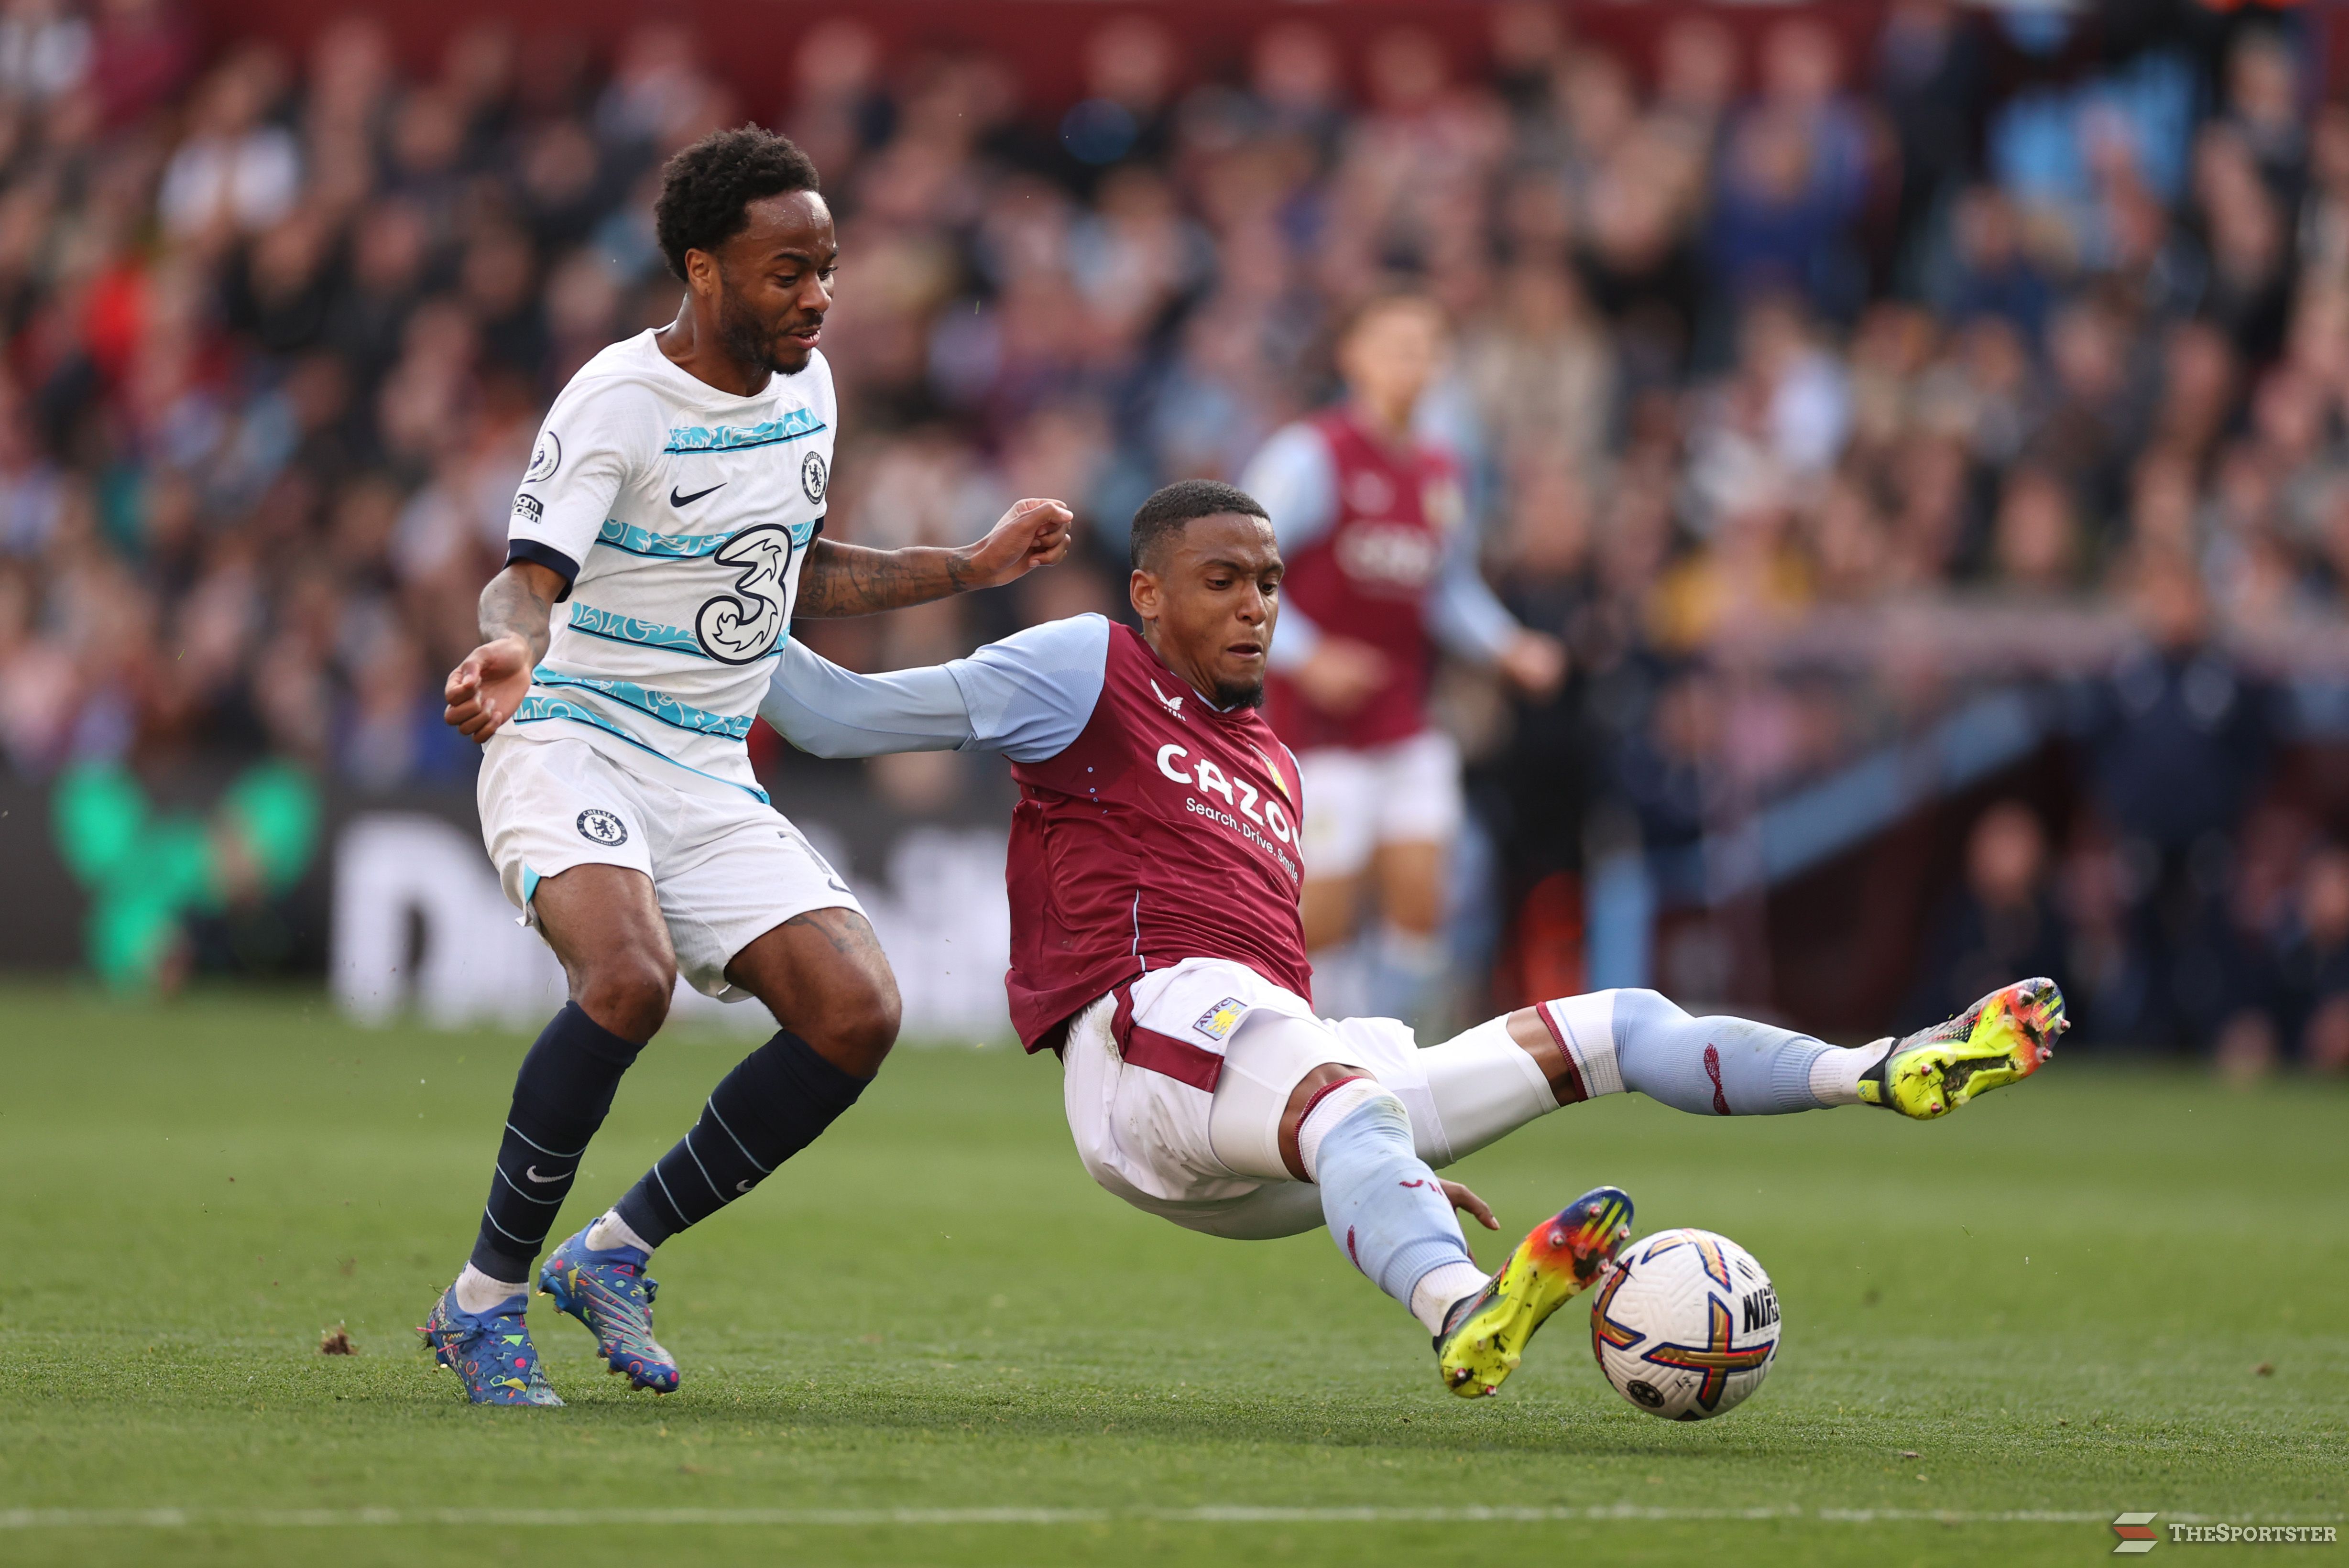 BIRMINGHAM, ENGLAND - OCTOBER 16: Raheem Sterling of Chelsea is challenged by Ezri Konsa of Aston Villa during the Premier League match between Aston Villa and Chelsea FC at Villa Park on October 16, 2022 in Birmingham, England. (Photo by Ryan Pierse/Getty Images)